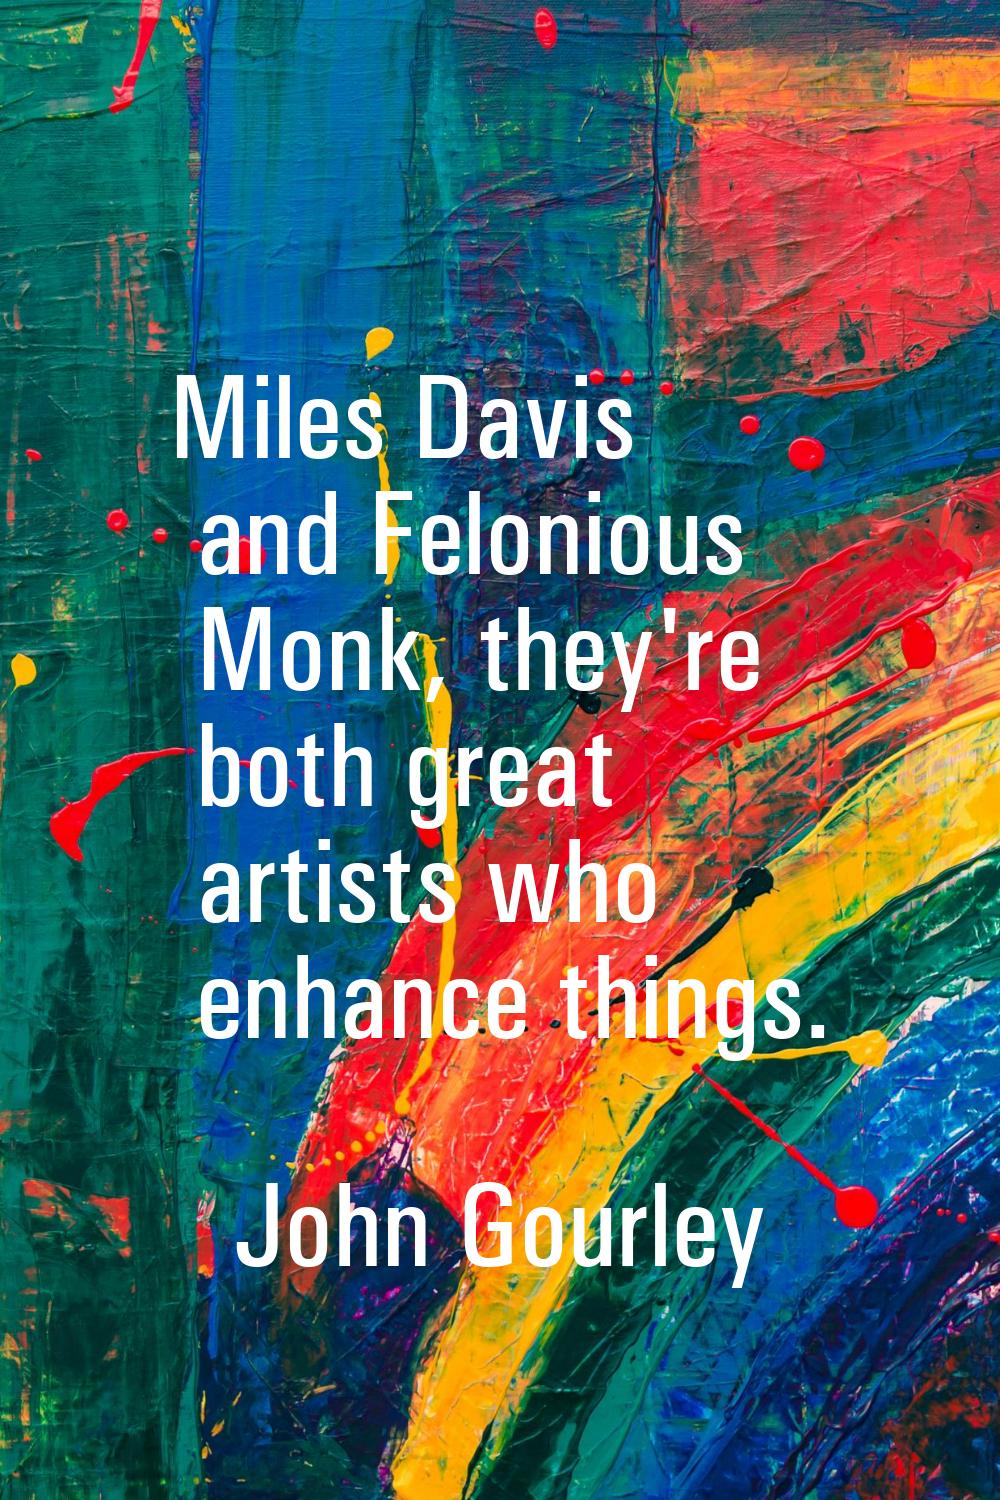 Miles Davis and Felonious Monk, they're both great artists who enhance things.